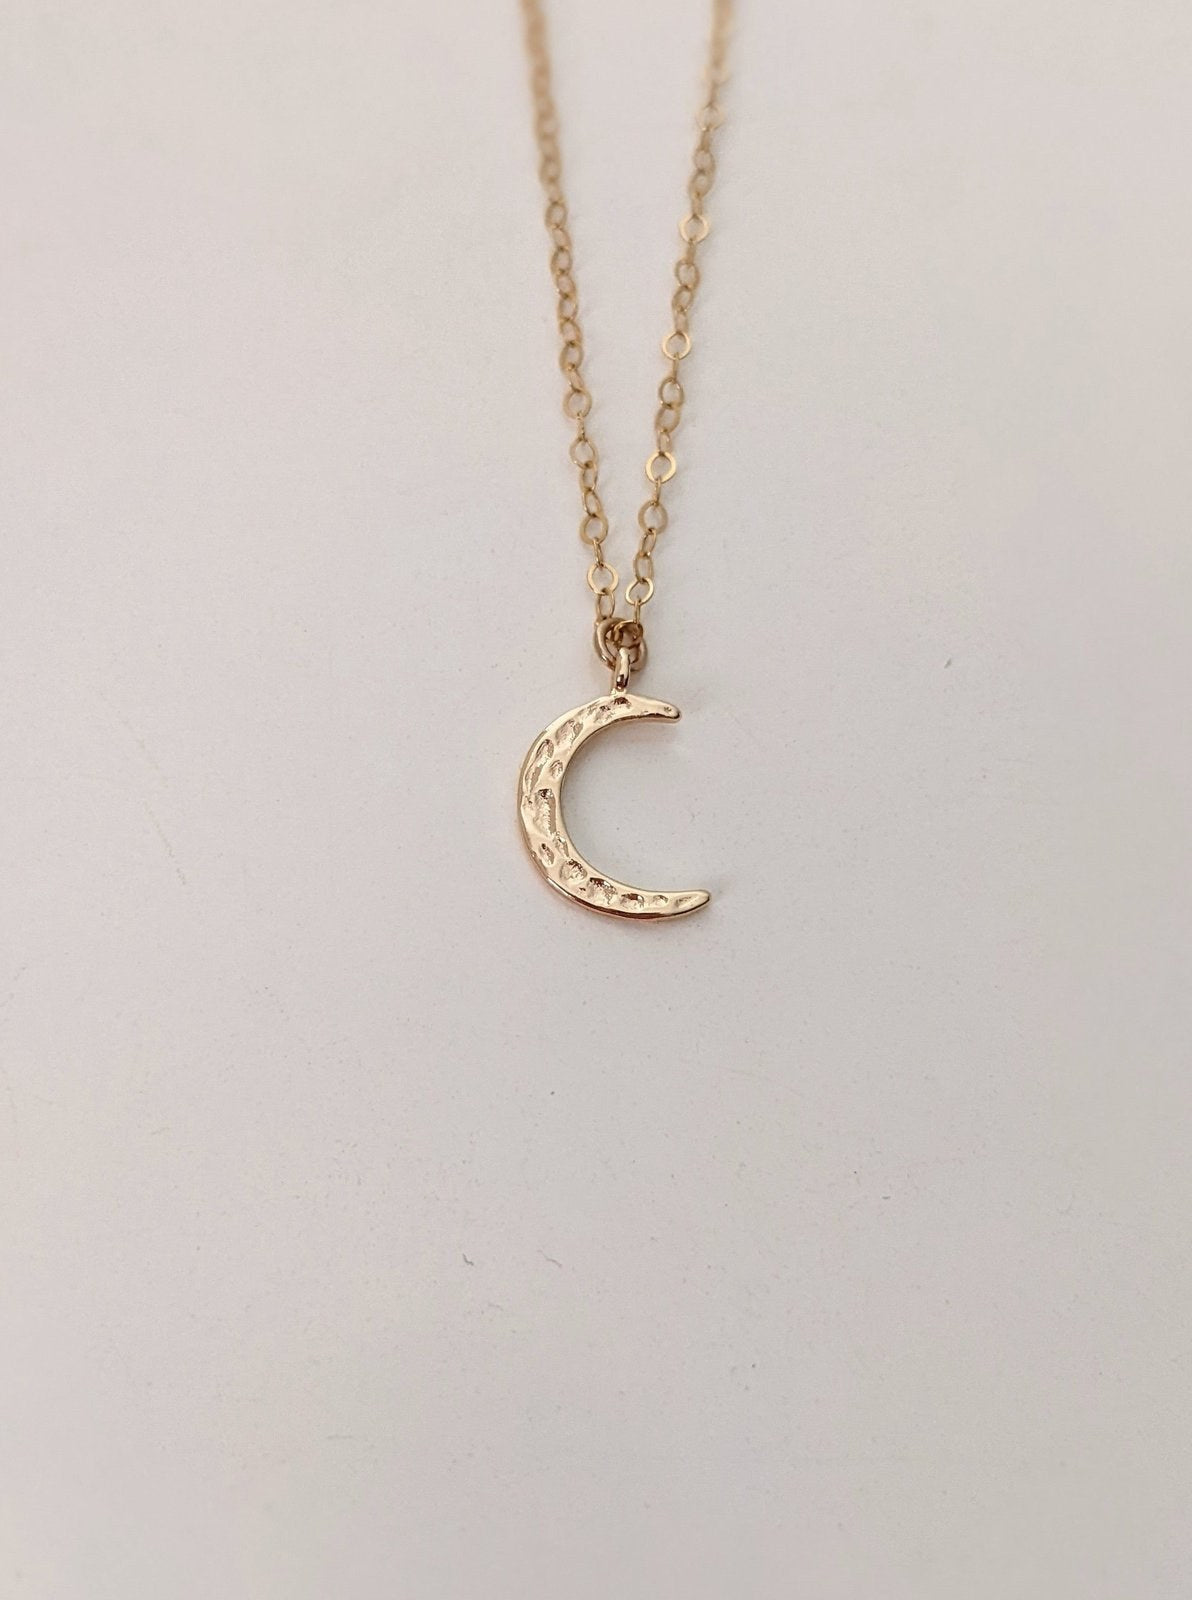 Hammered Crescent Moon Necklace Layer the Love